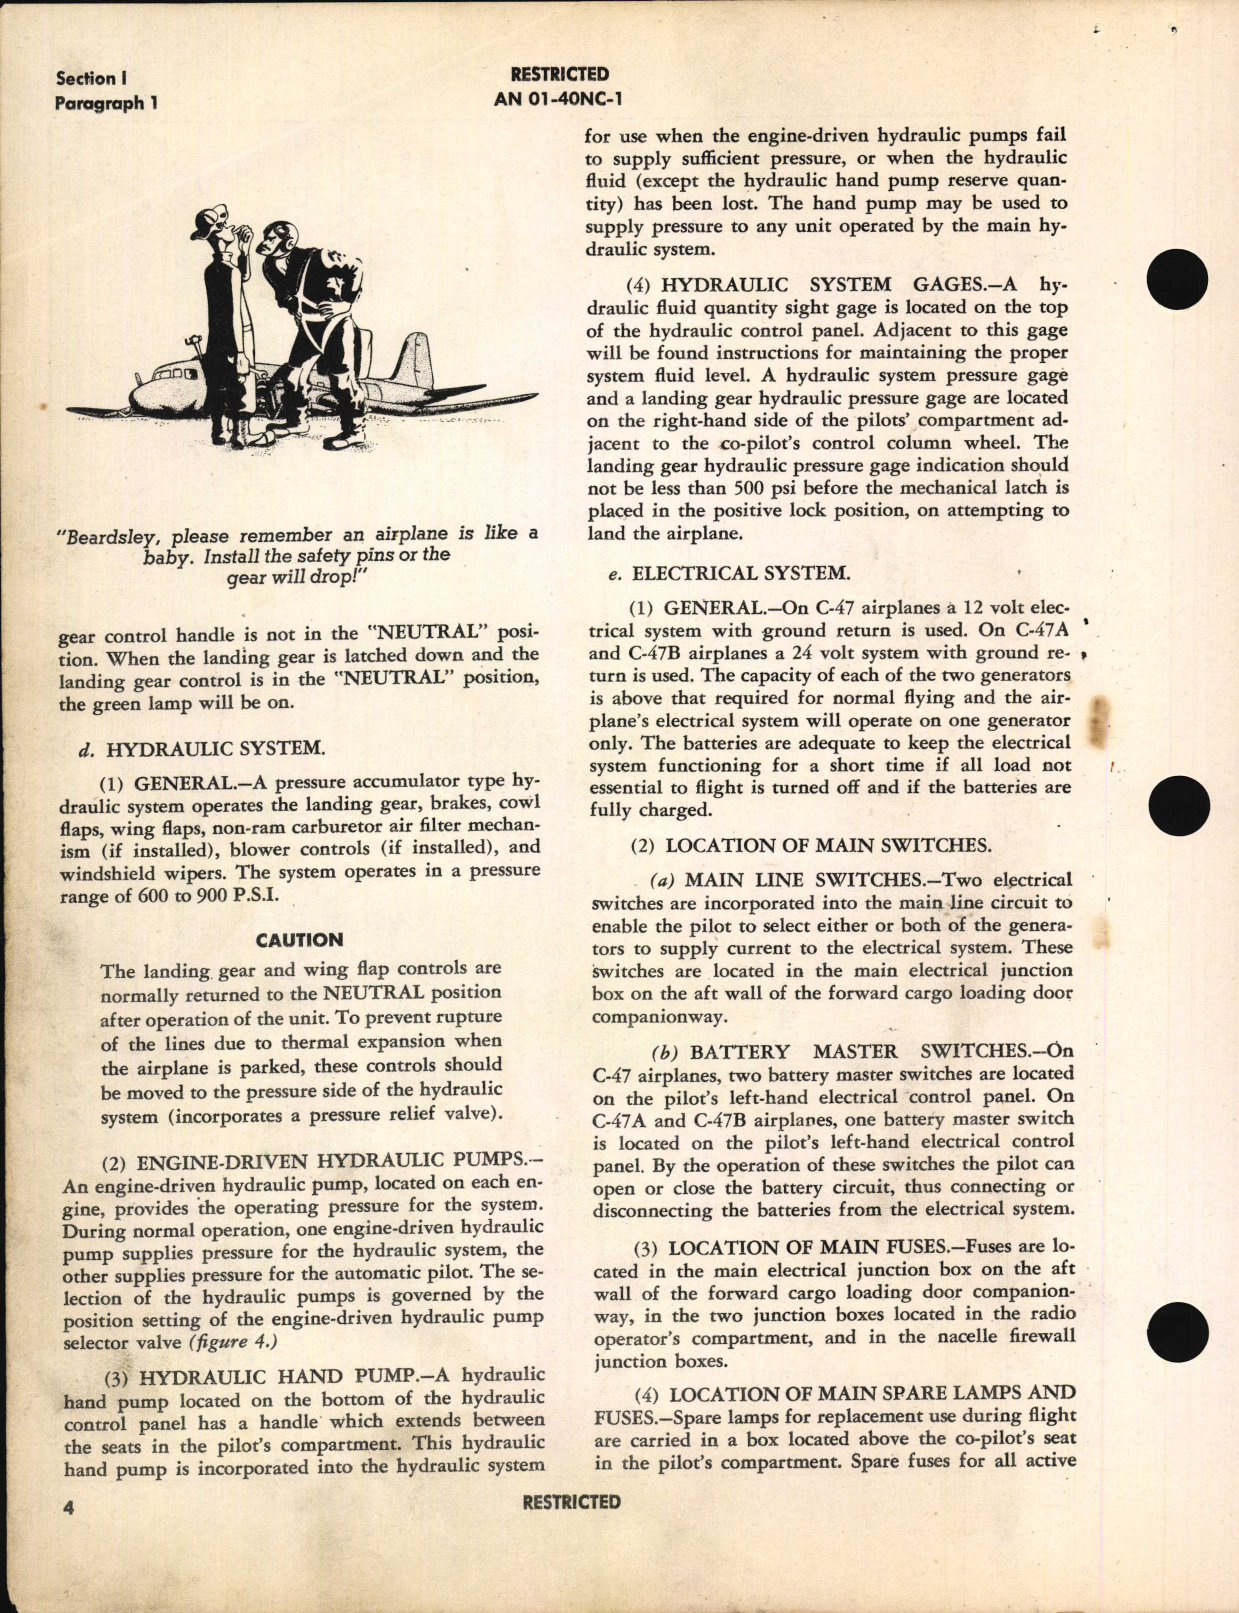 Sample page 8 from AirCorps Library document: Pilot's Flight Operating Instructions for C-47, C-47A, C-47B, R4D-1, R4D-5, and R4D-6